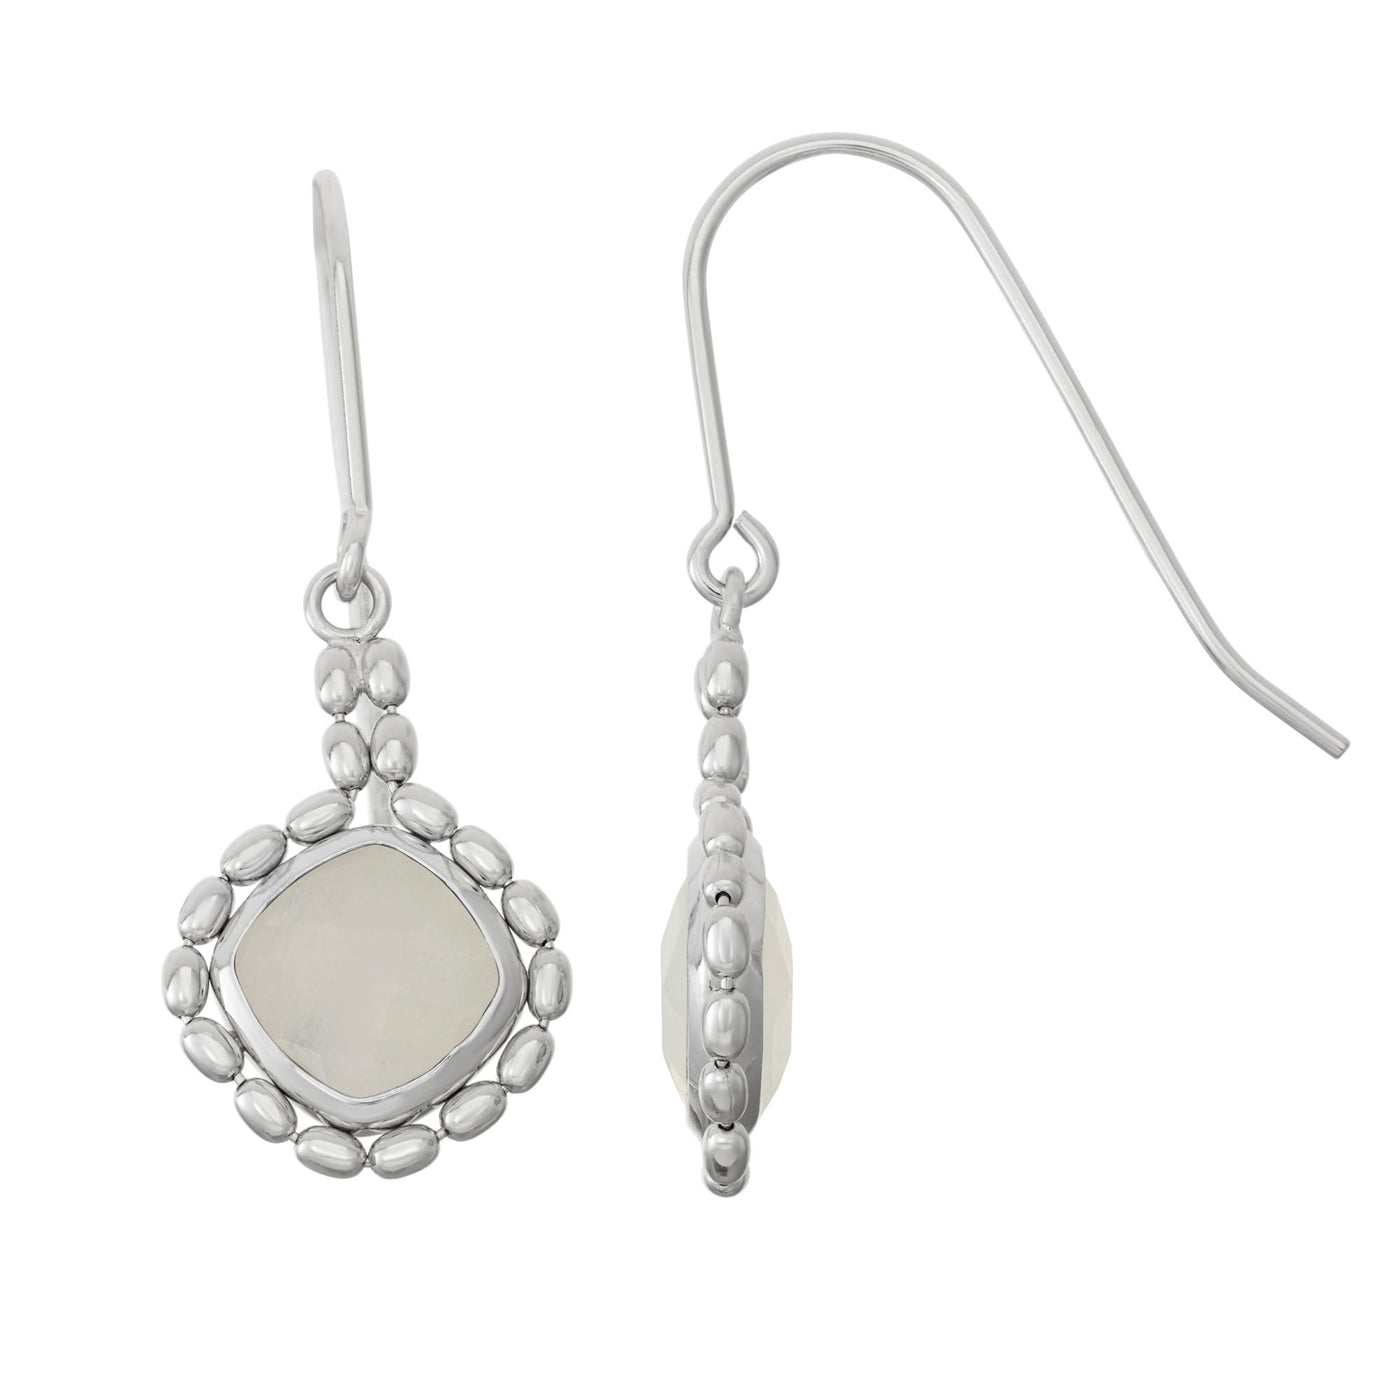 Rebecca Sloane Silver Beads Earring With Moonstone Square Stone